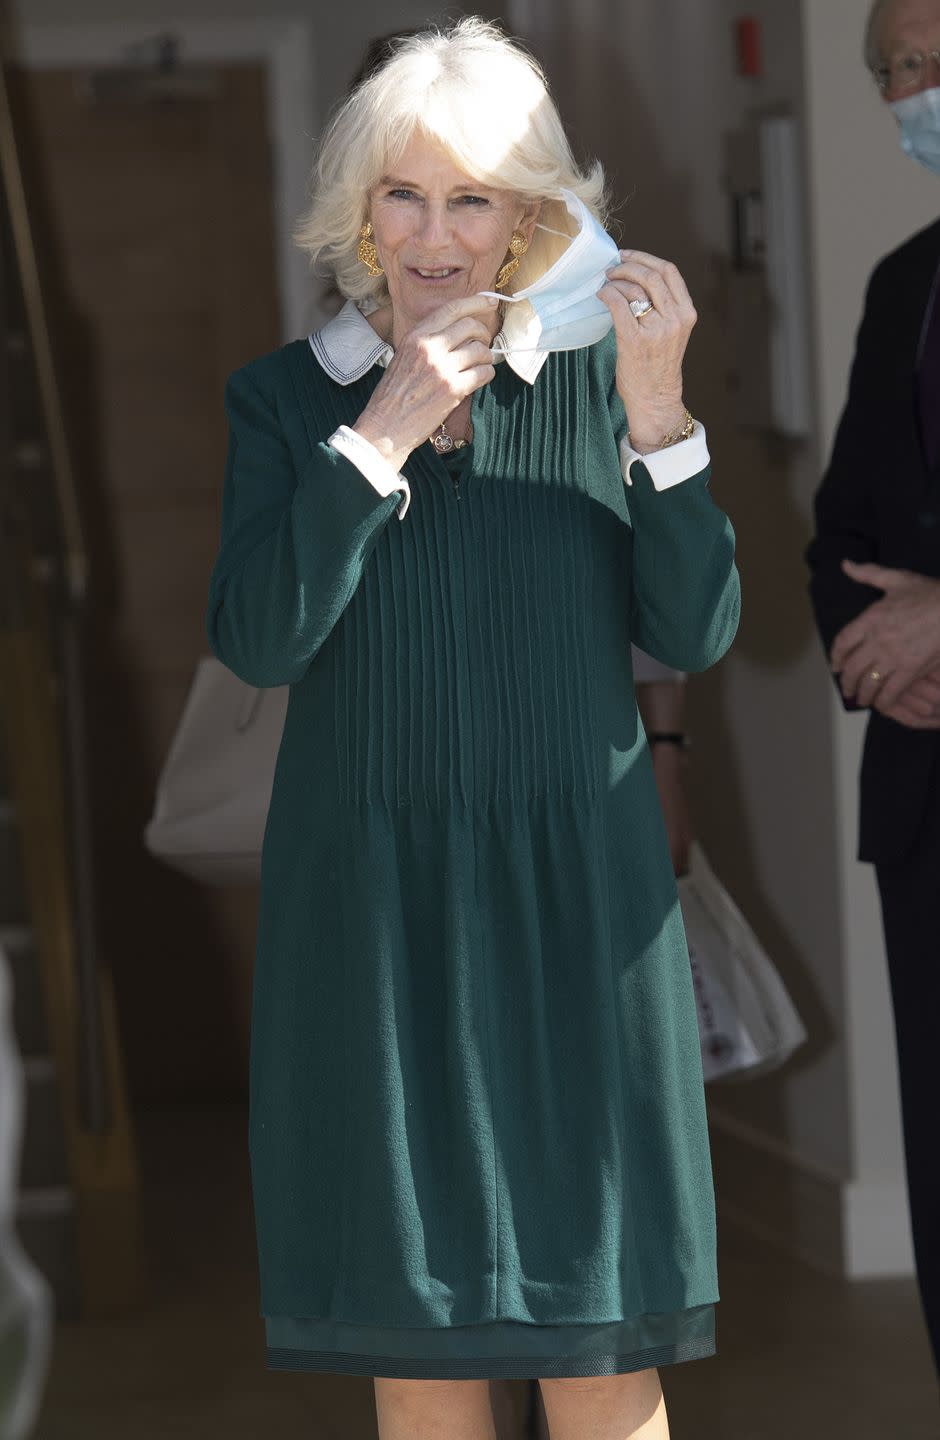 <p>Camilla wore a collared green and white dress and gold statement earrings while visiting frontline workers at a pharmacy in Sussex. <br></p>